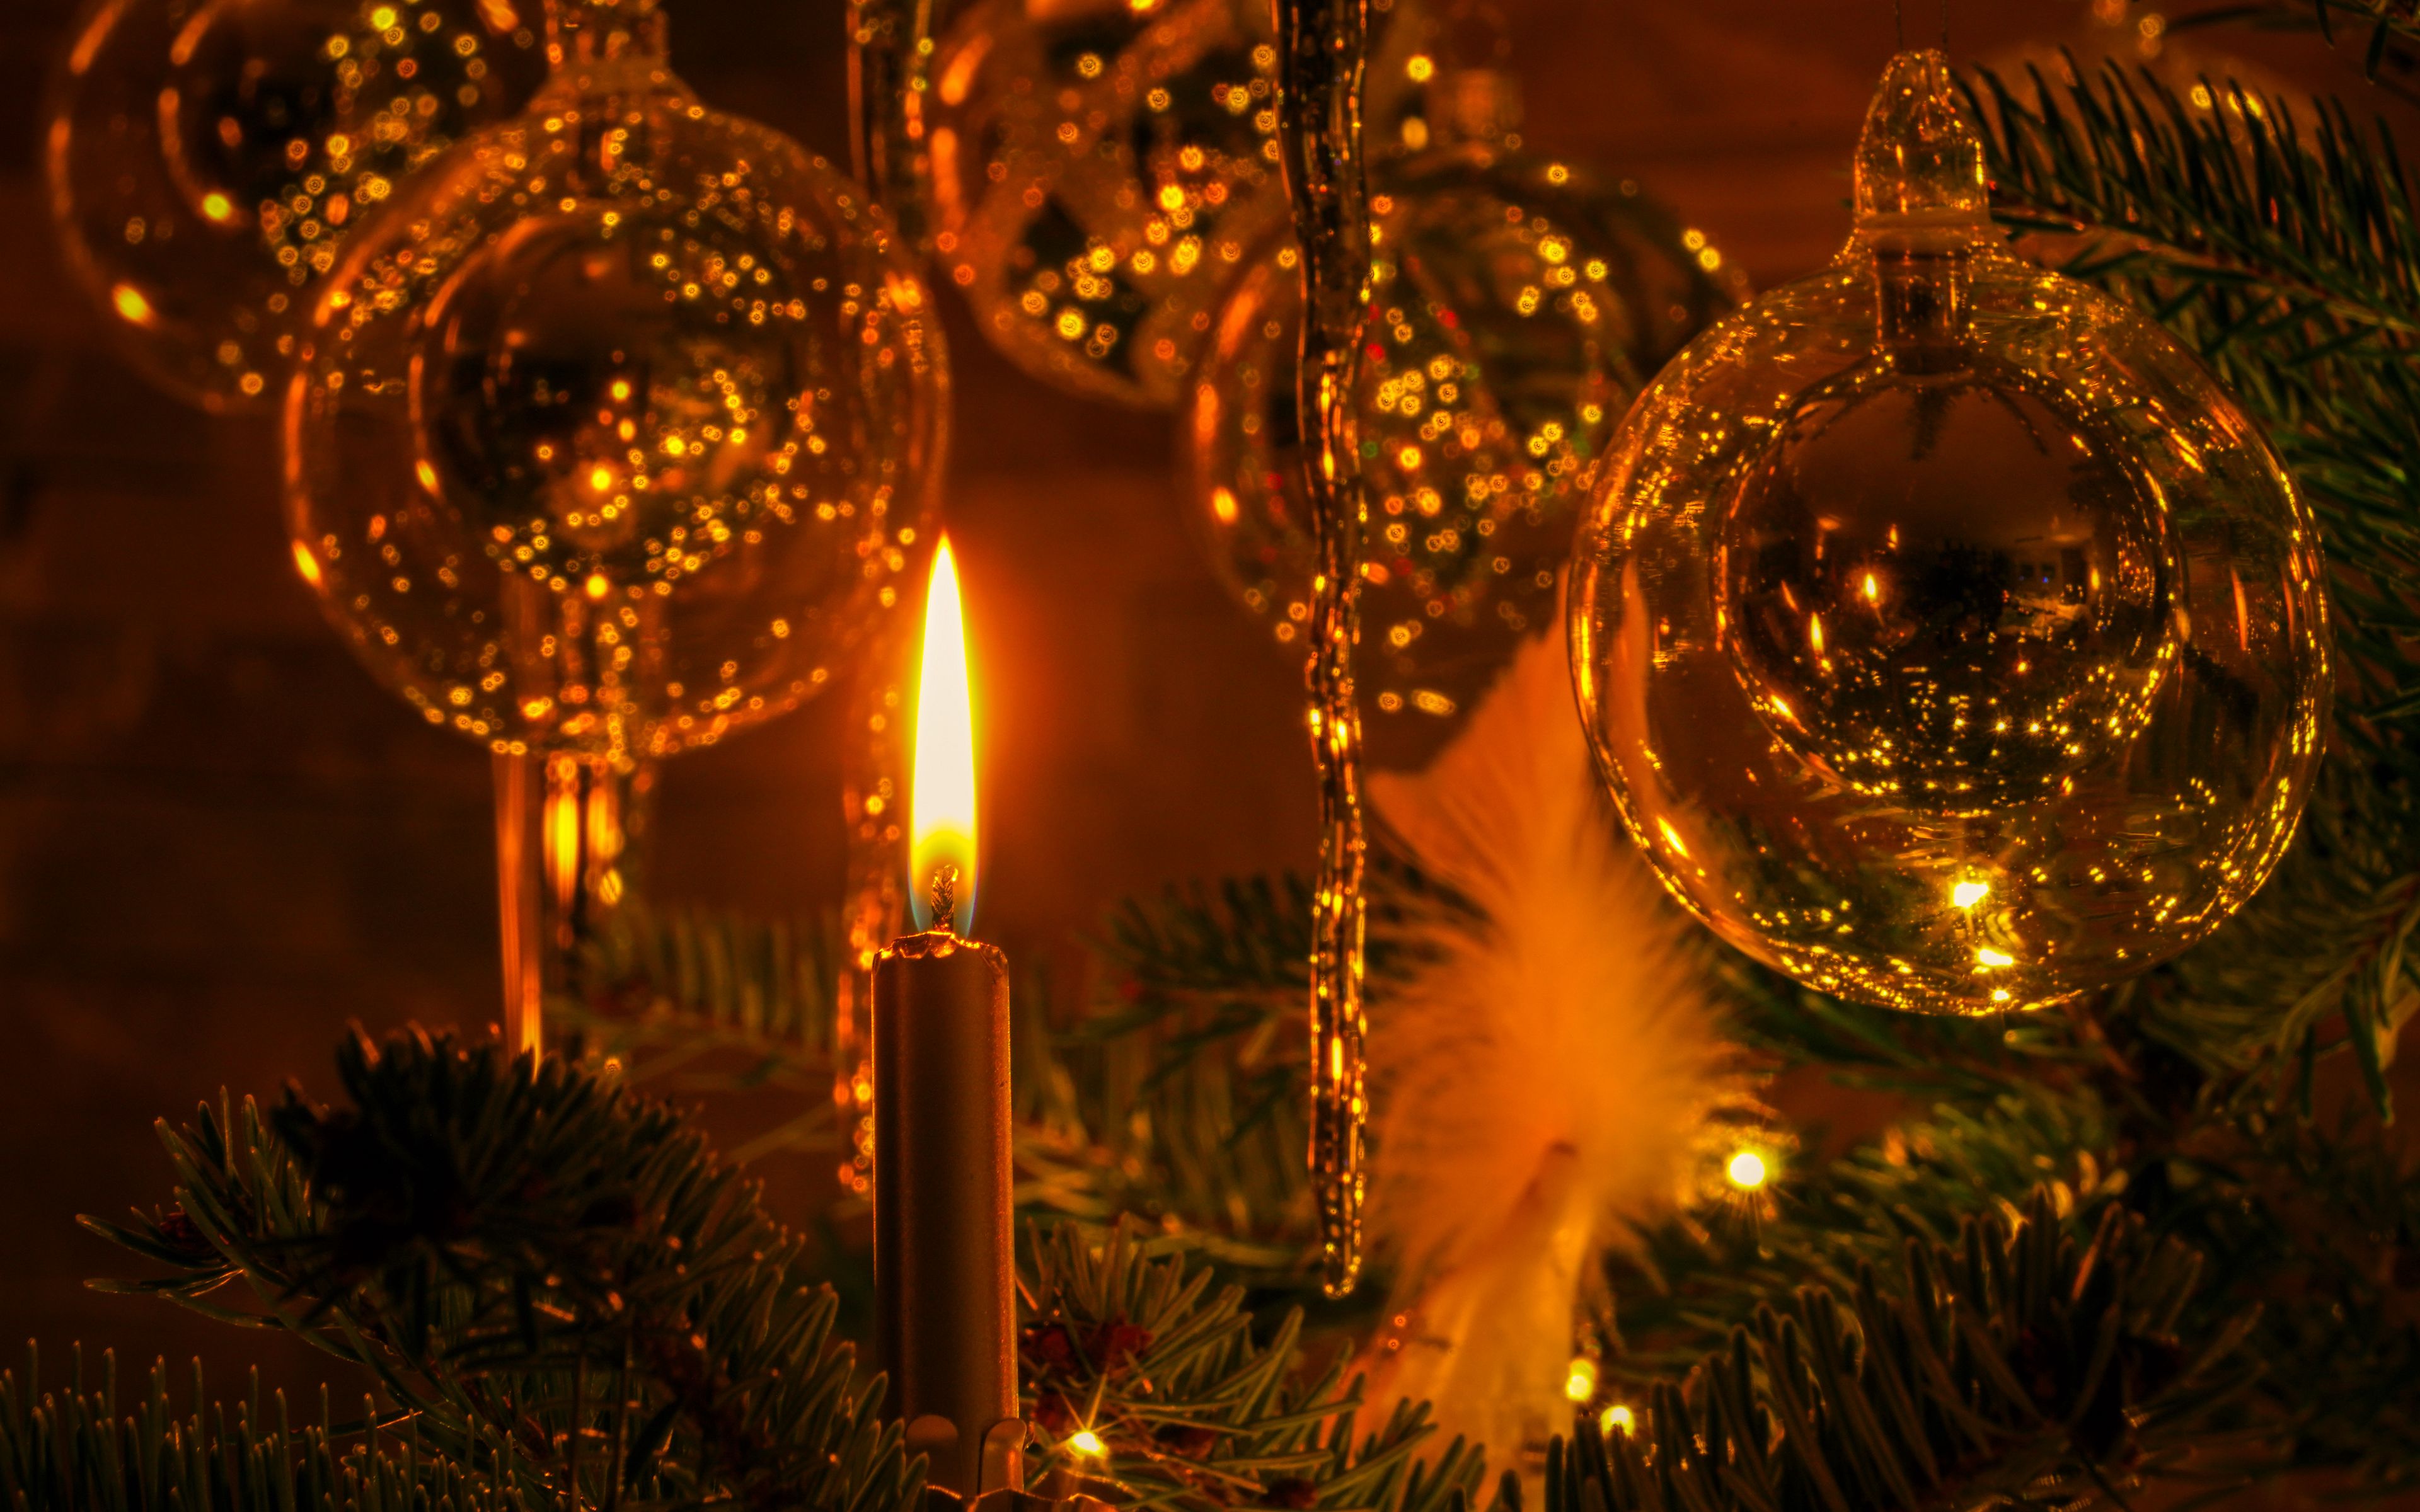 Download wallpaper 3840x2400 candle, ball, decorations, new year ...